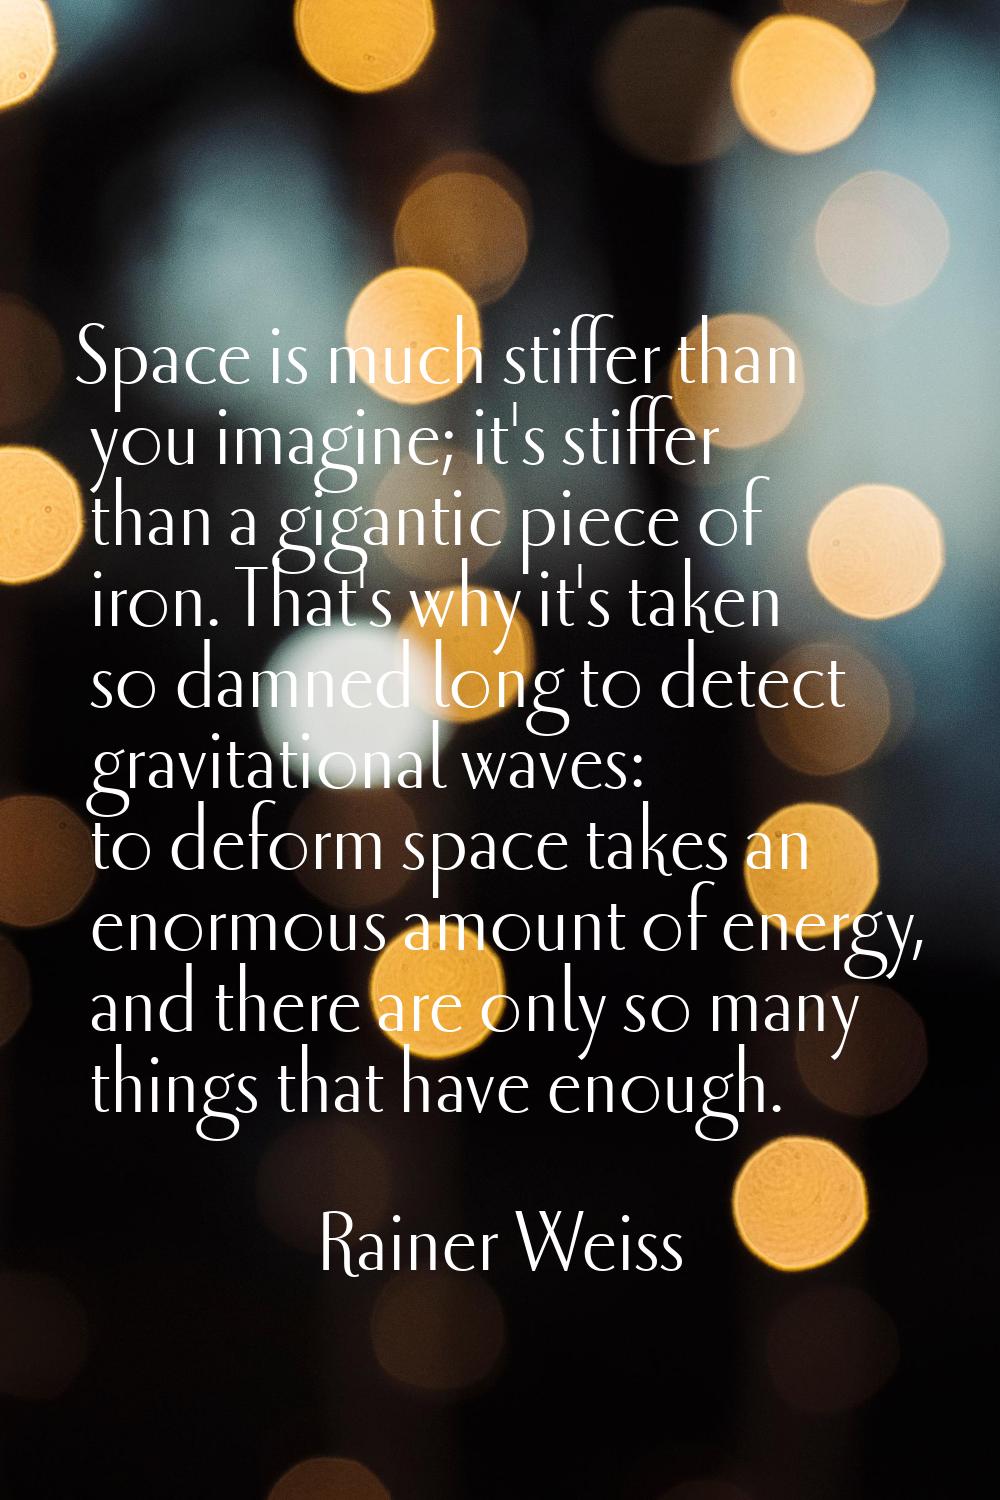 Space is much stiffer than you imagine; it's stiffer than a gigantic piece of iron. That's why it's